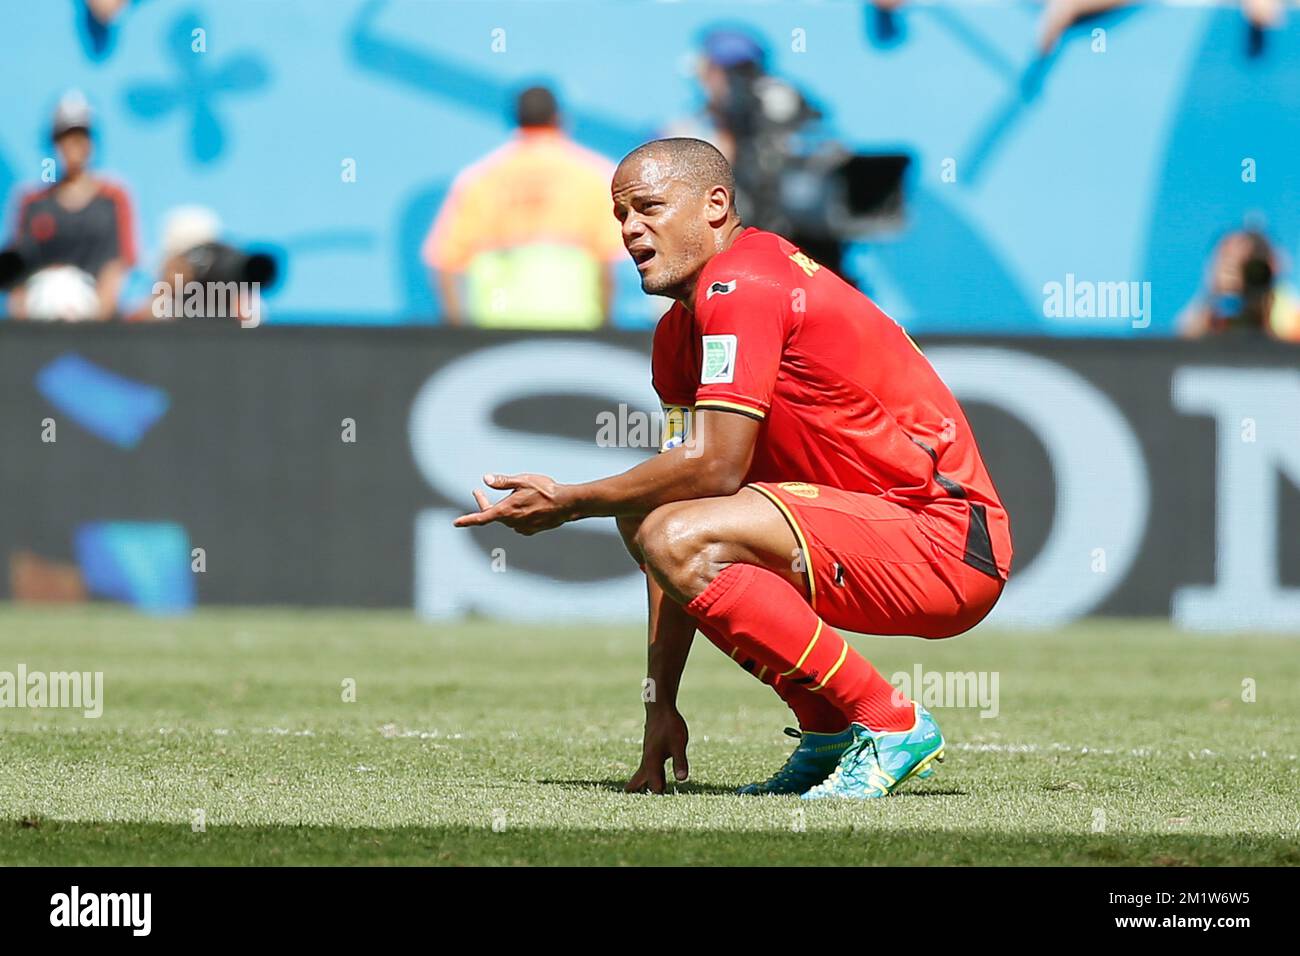 Belgium's captain Vincent Kompany looks dejected during the quarter final match between Belgian national soccer team Red Devils and Argentina, in Estadio Nacional Mane Garrincha, in Brasilia, Brazil, during the 2014 FIFA World Cup, Saturday 05 July 2014. BELGA PHOTO BRUNO FAHY Stock Photo